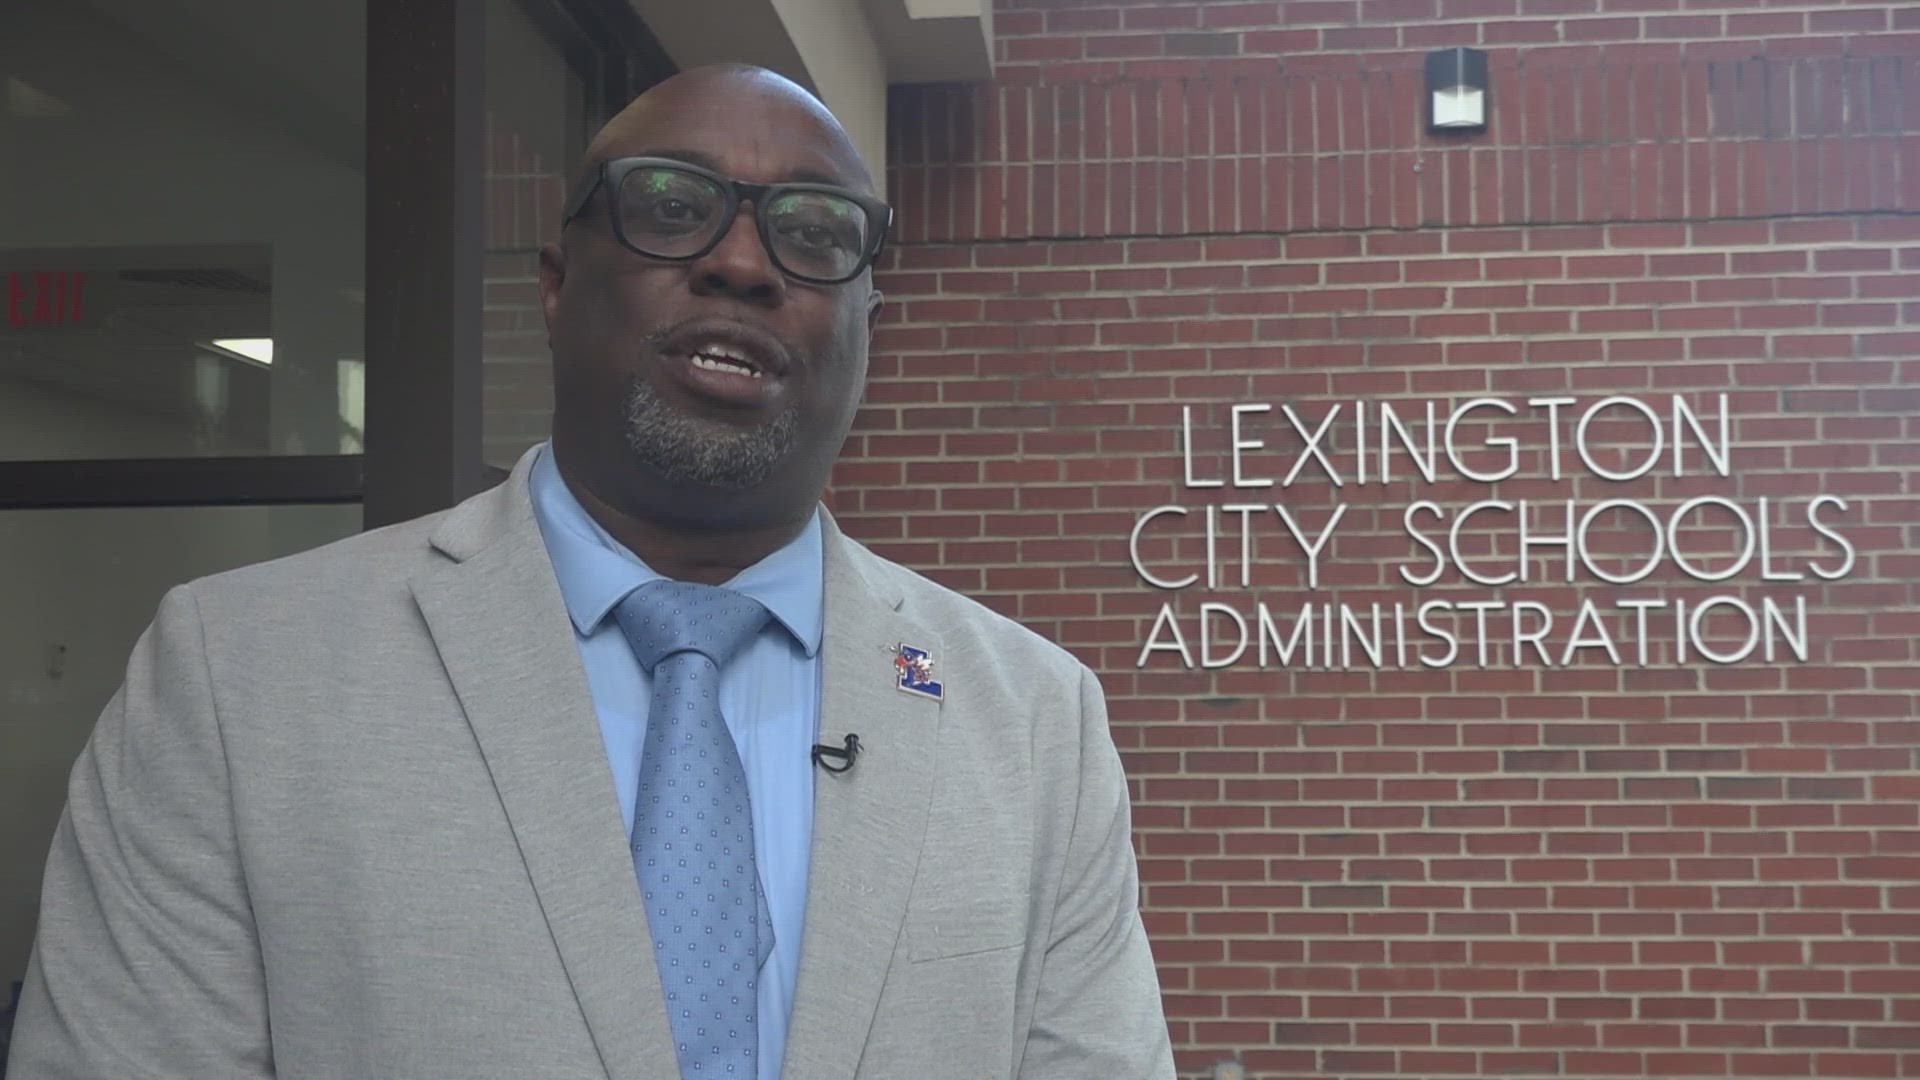 A Lexington City Schools board member said there’s likely not much a district can do to stop threats, and keeping students safe will always be a priority.